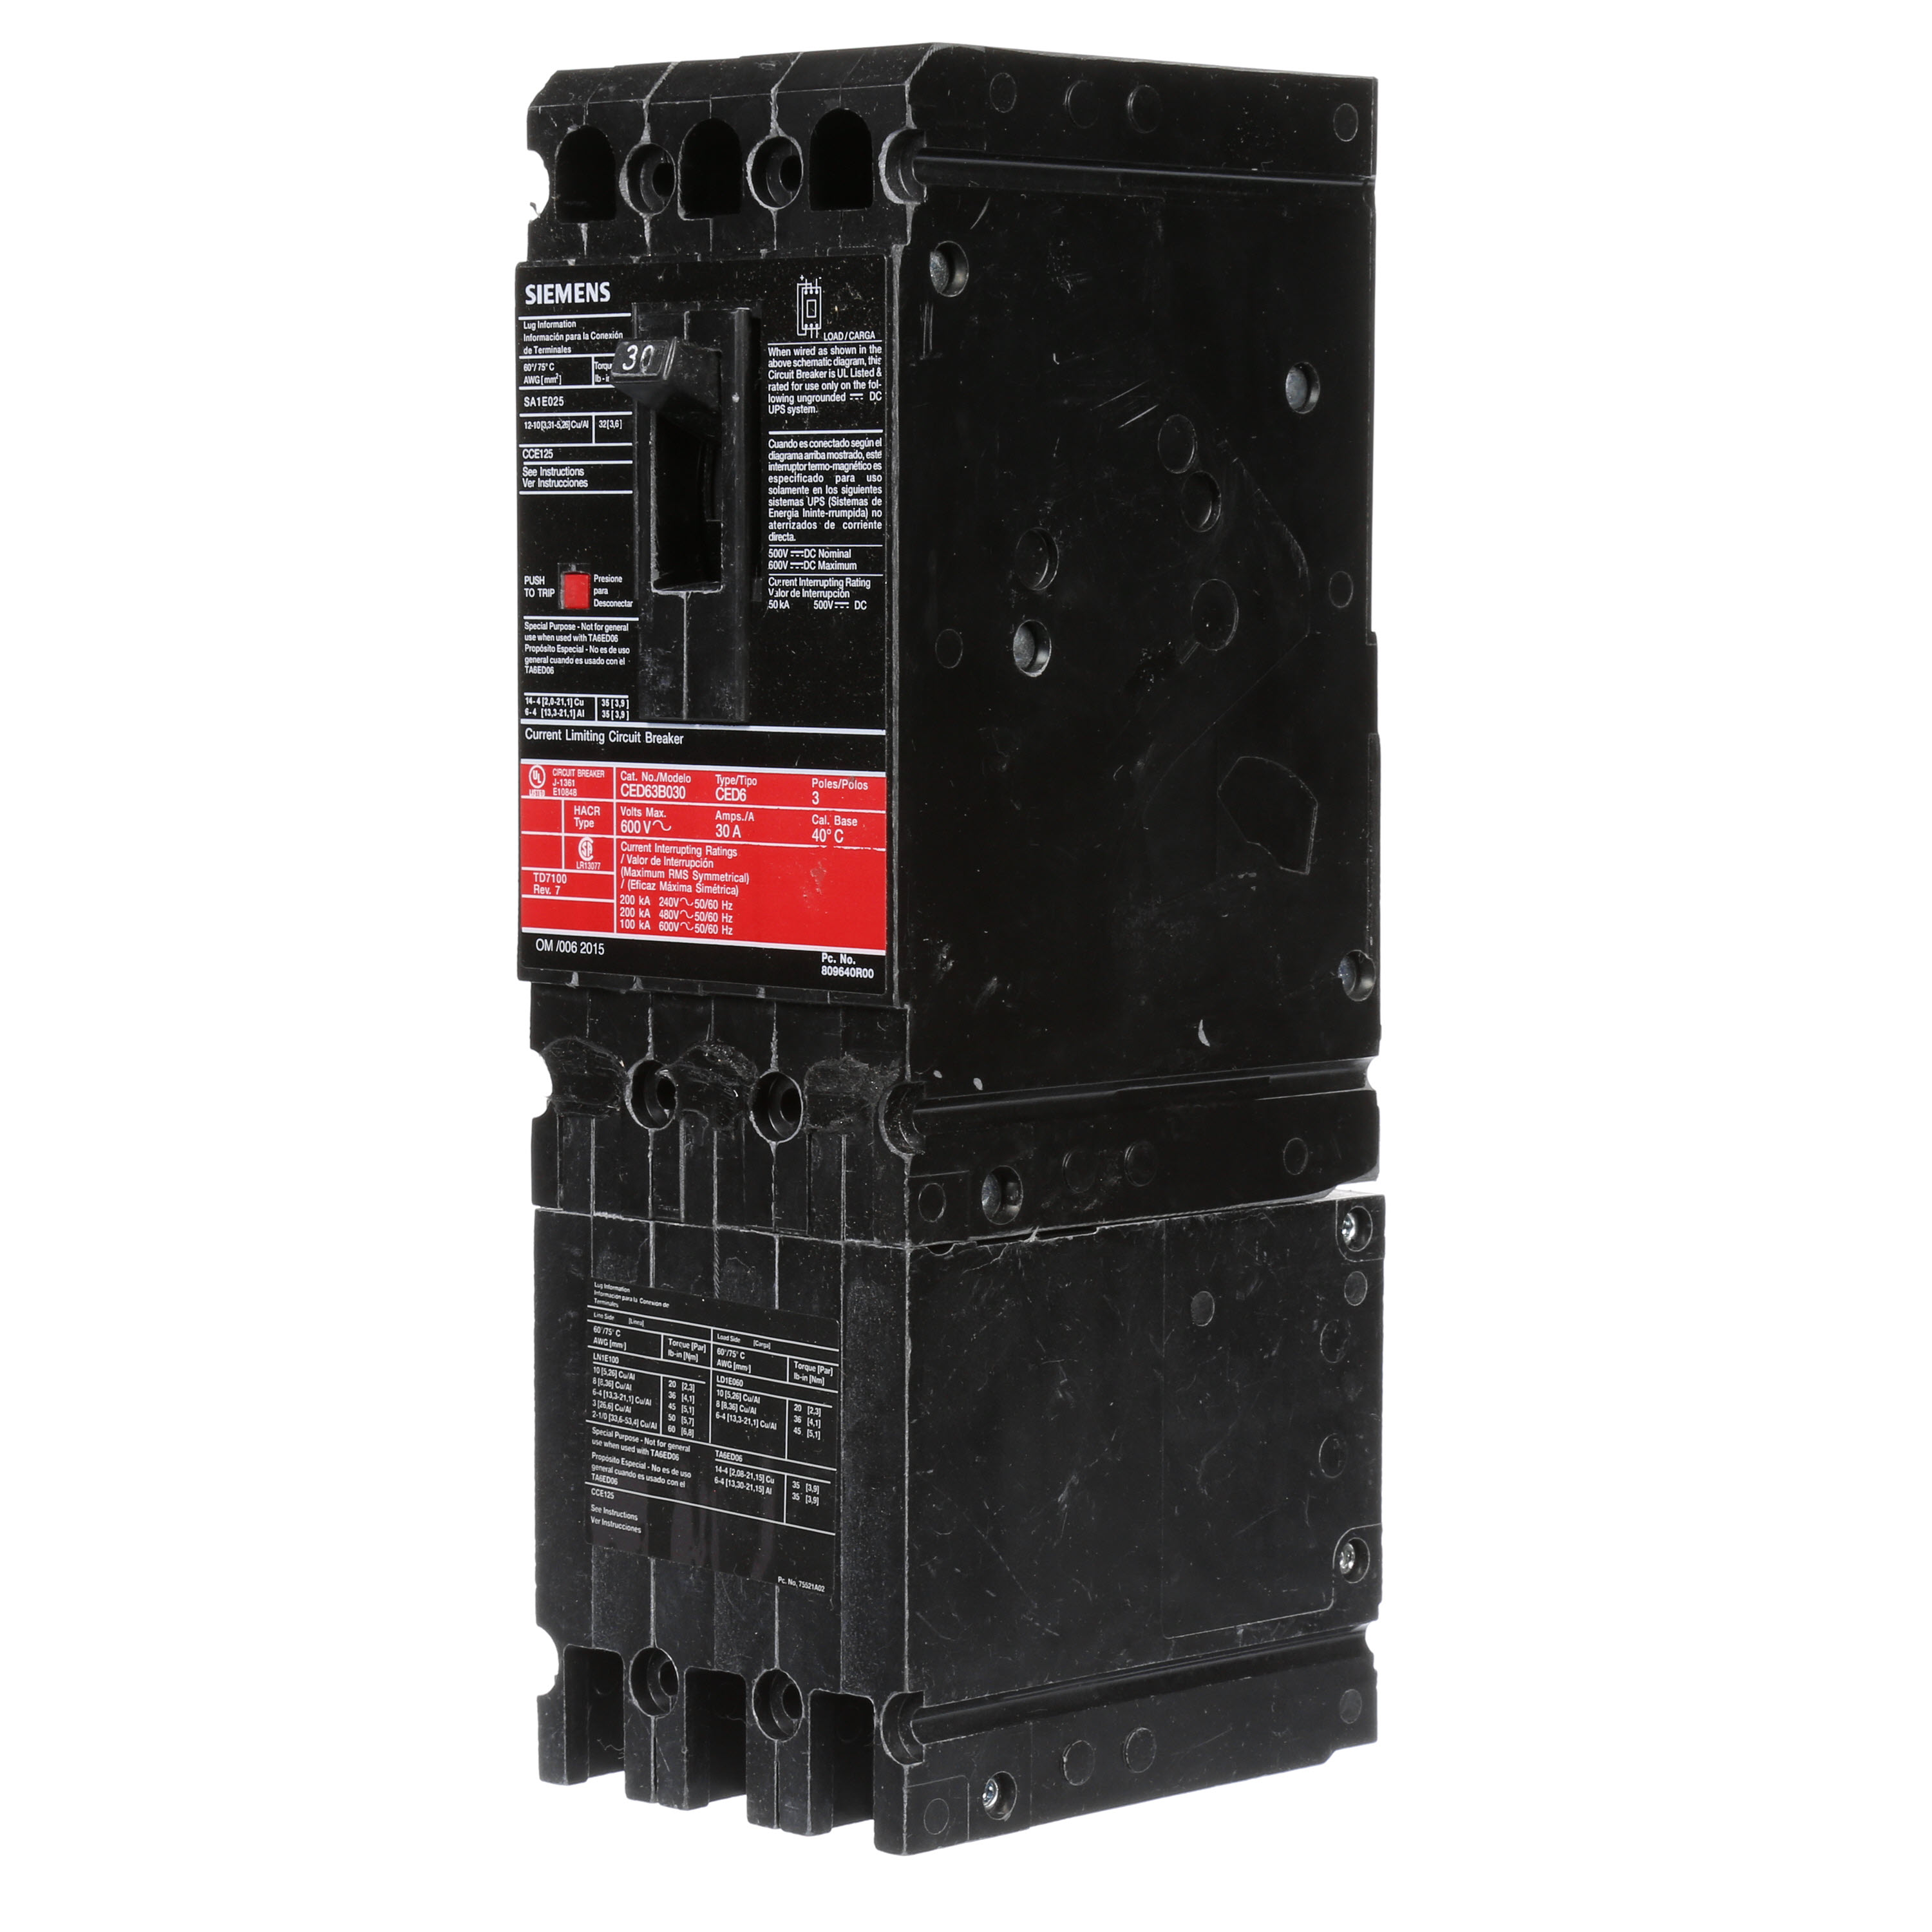 SIEMENS LOW VOLTAGE SENTRON MOLDED CASE CIRCUIT BREAKER WITH THERMAL - MAGNETICTRIP UNIT. STANDARD 40 DEG C BREAKER ED FRAME WITH FUSELESS CURRENT LIMITING BREAKING CAPACITY. 30A 3-POLE (100KAIC AT 600V) (200KAIC AT 480V). NON-INTERCHANGEABLE TRIP UNIT. SPECIAL FEATURES LOAD LUGS ONLY (LN1E100) WIRE RANGE 10 - 1/0AWG(CU/AL). DIMENSIONS (W x H x D) IN 3.00 x 9.6 x 3.92.